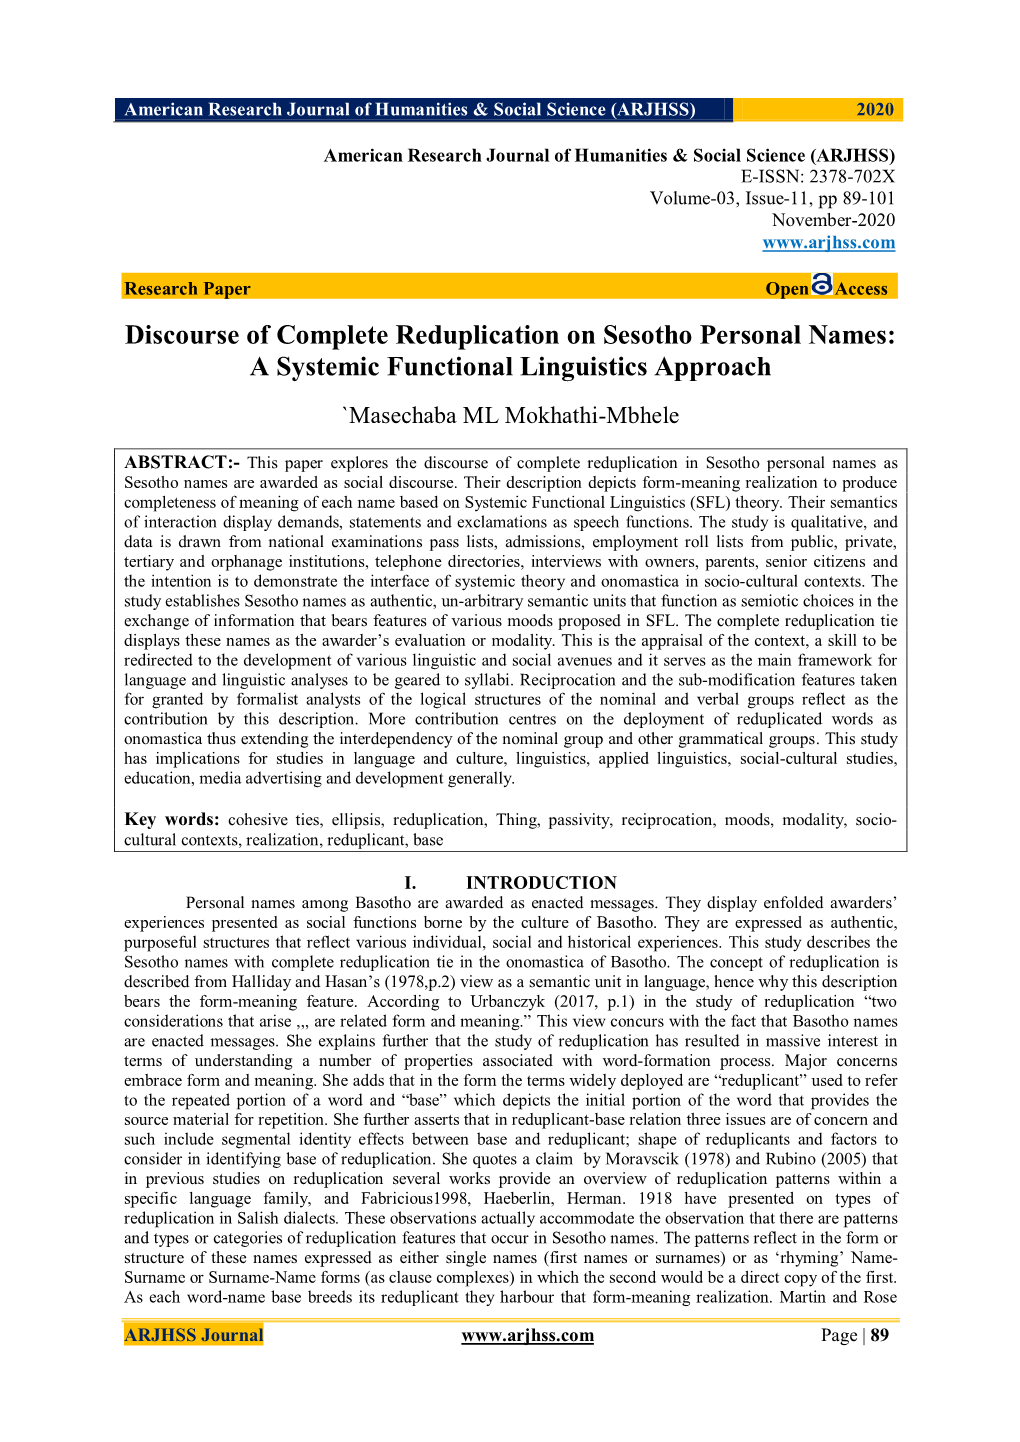 Discourse of Complete Reduplication on Sesotho Personal Names: a Systemic Functional Linguistics Approach